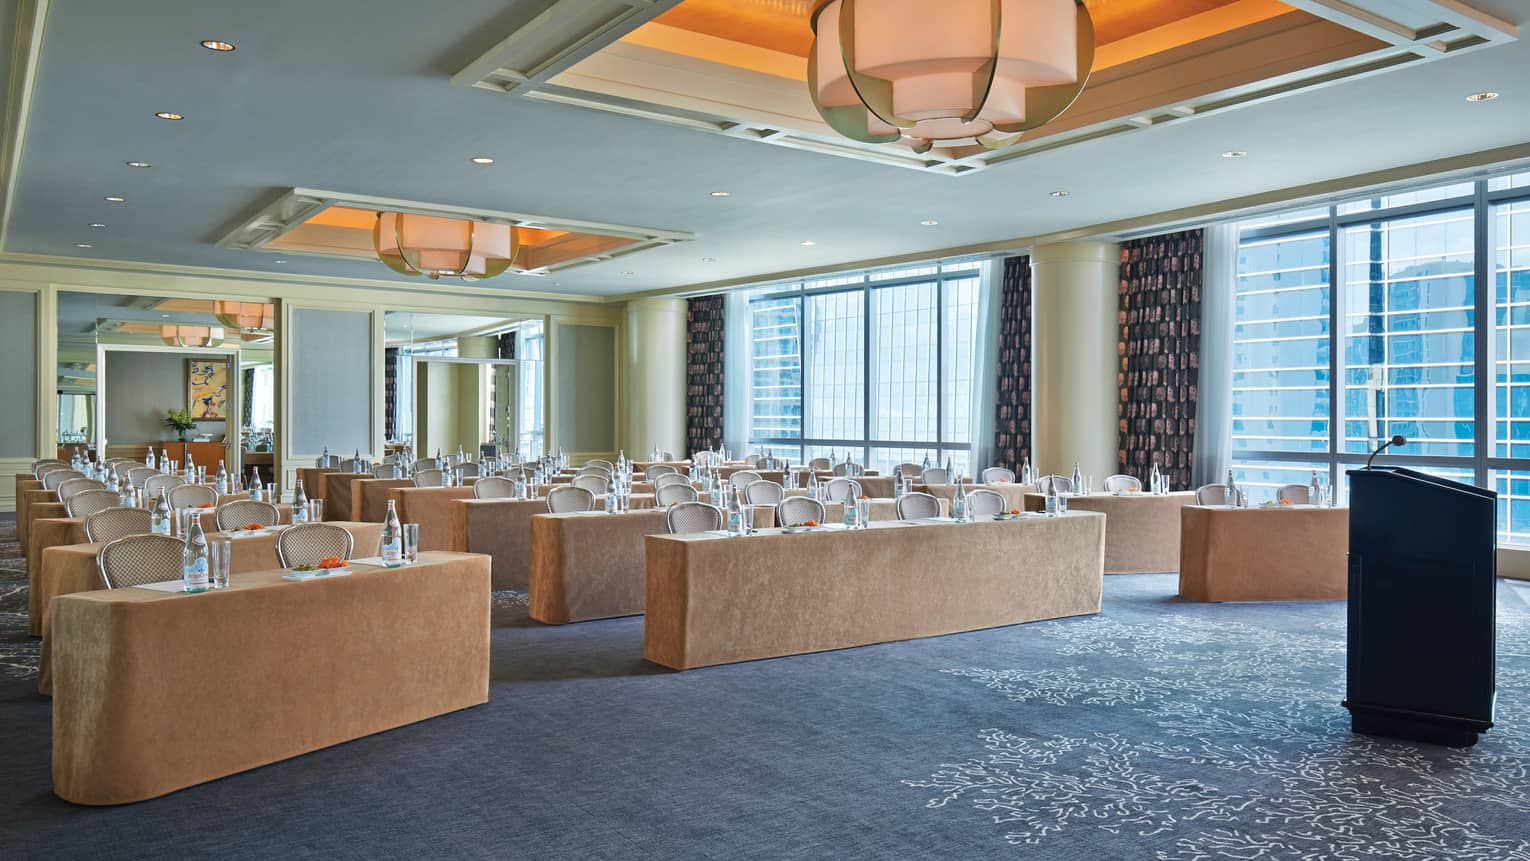 Rows of meeting tables in bright function room